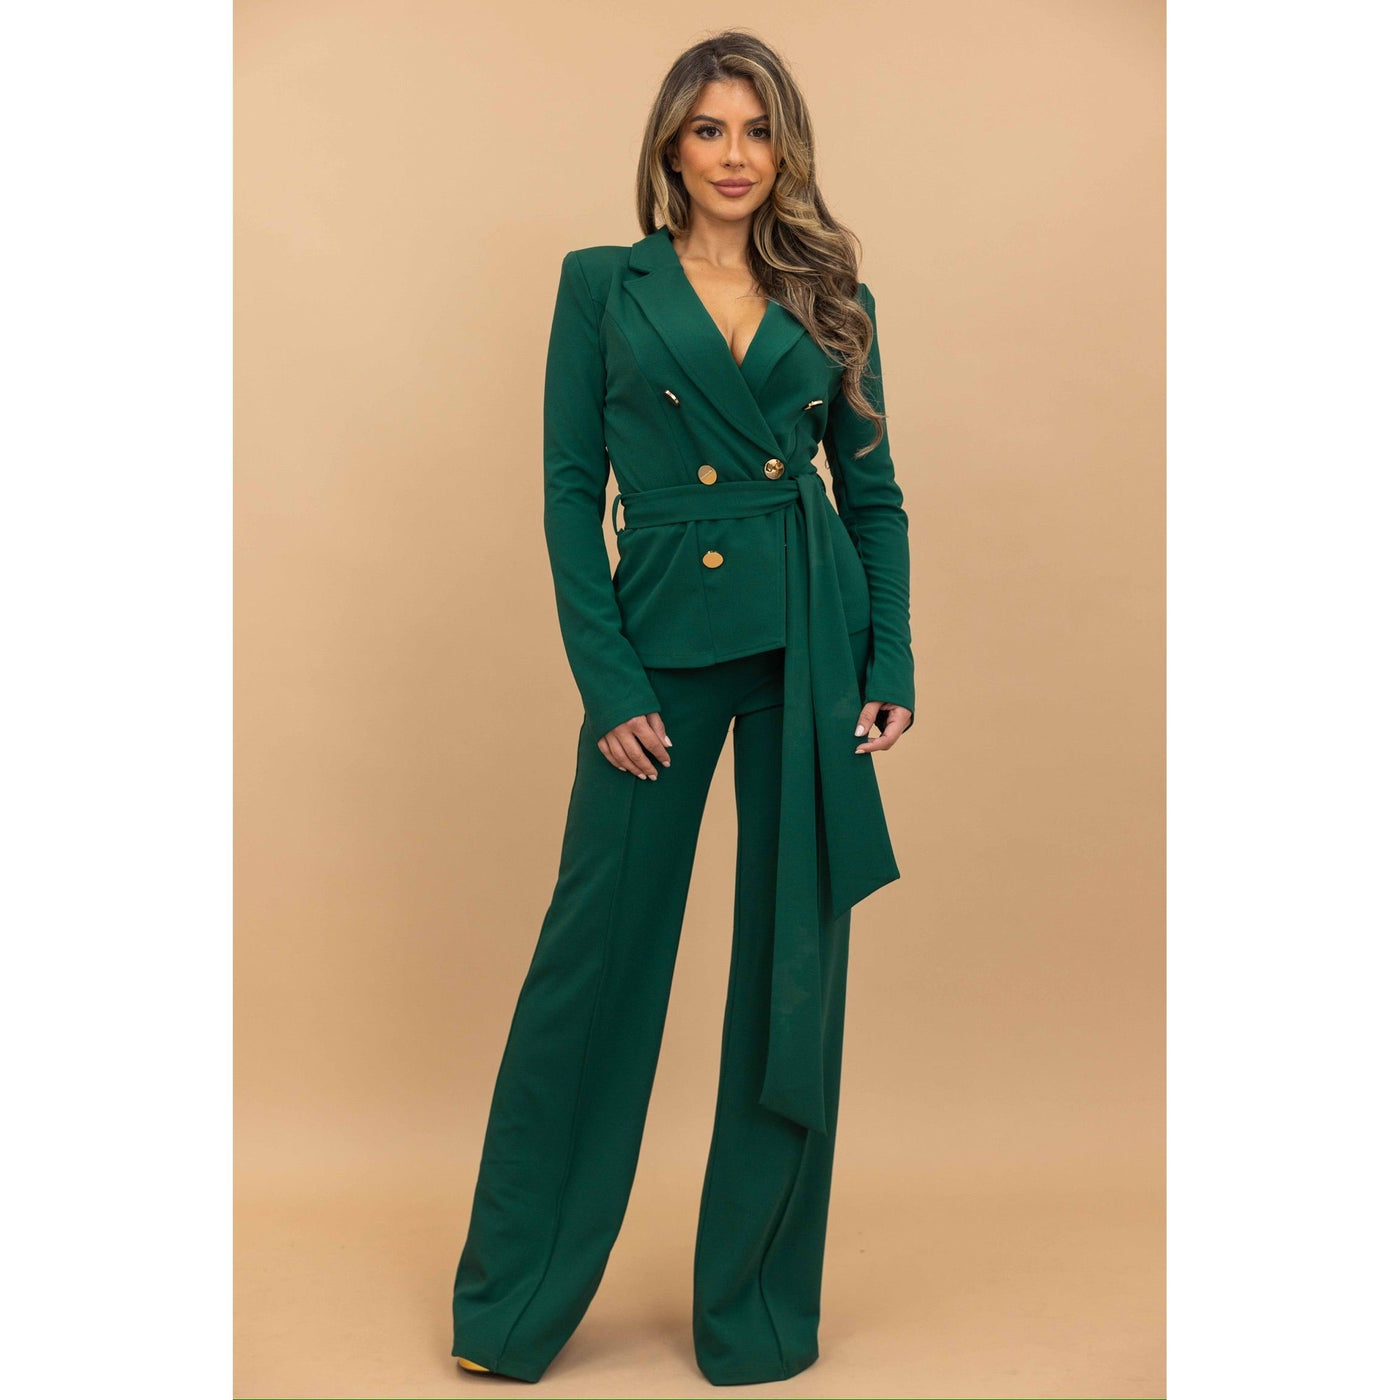 Limited Edition Hunter Green Pants Suit